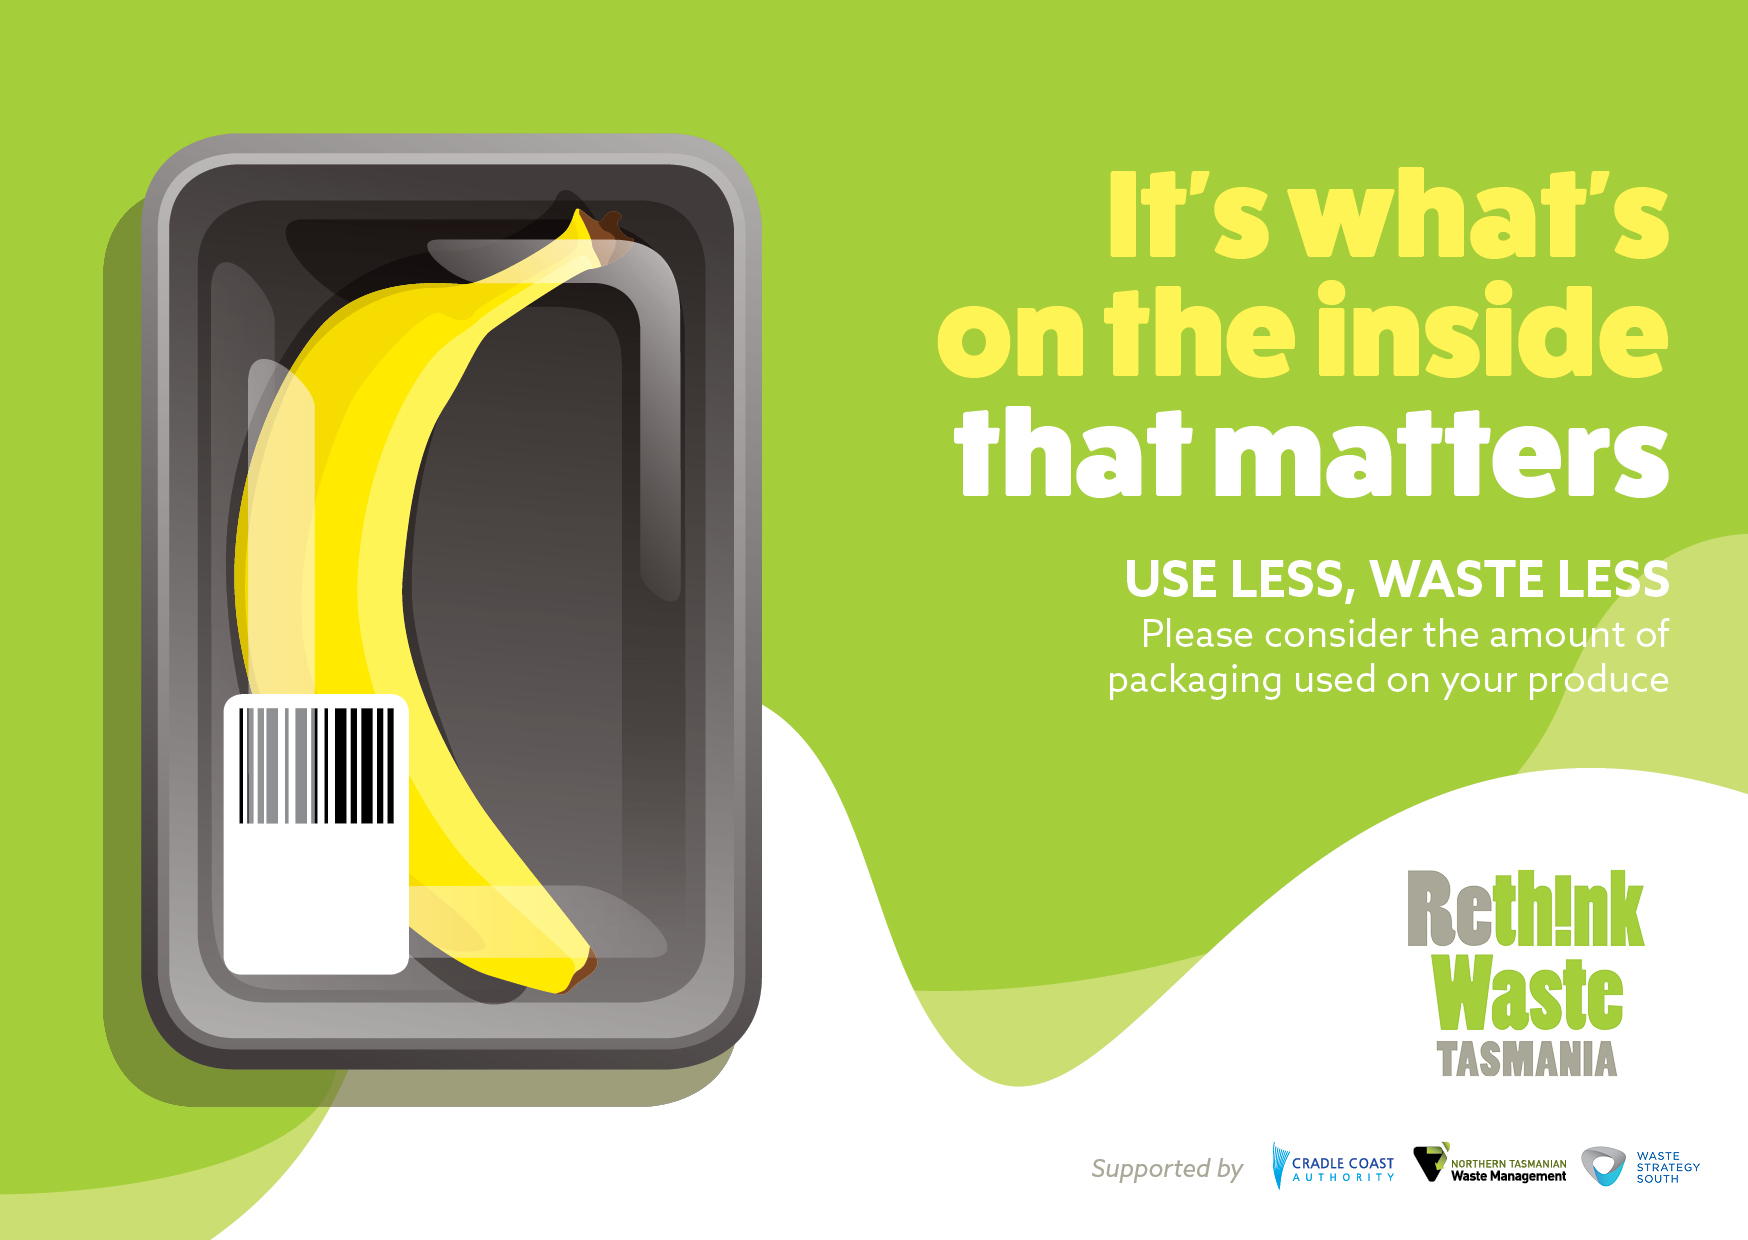 It’s what’s on the inside that matters – spread the word on excess packaging